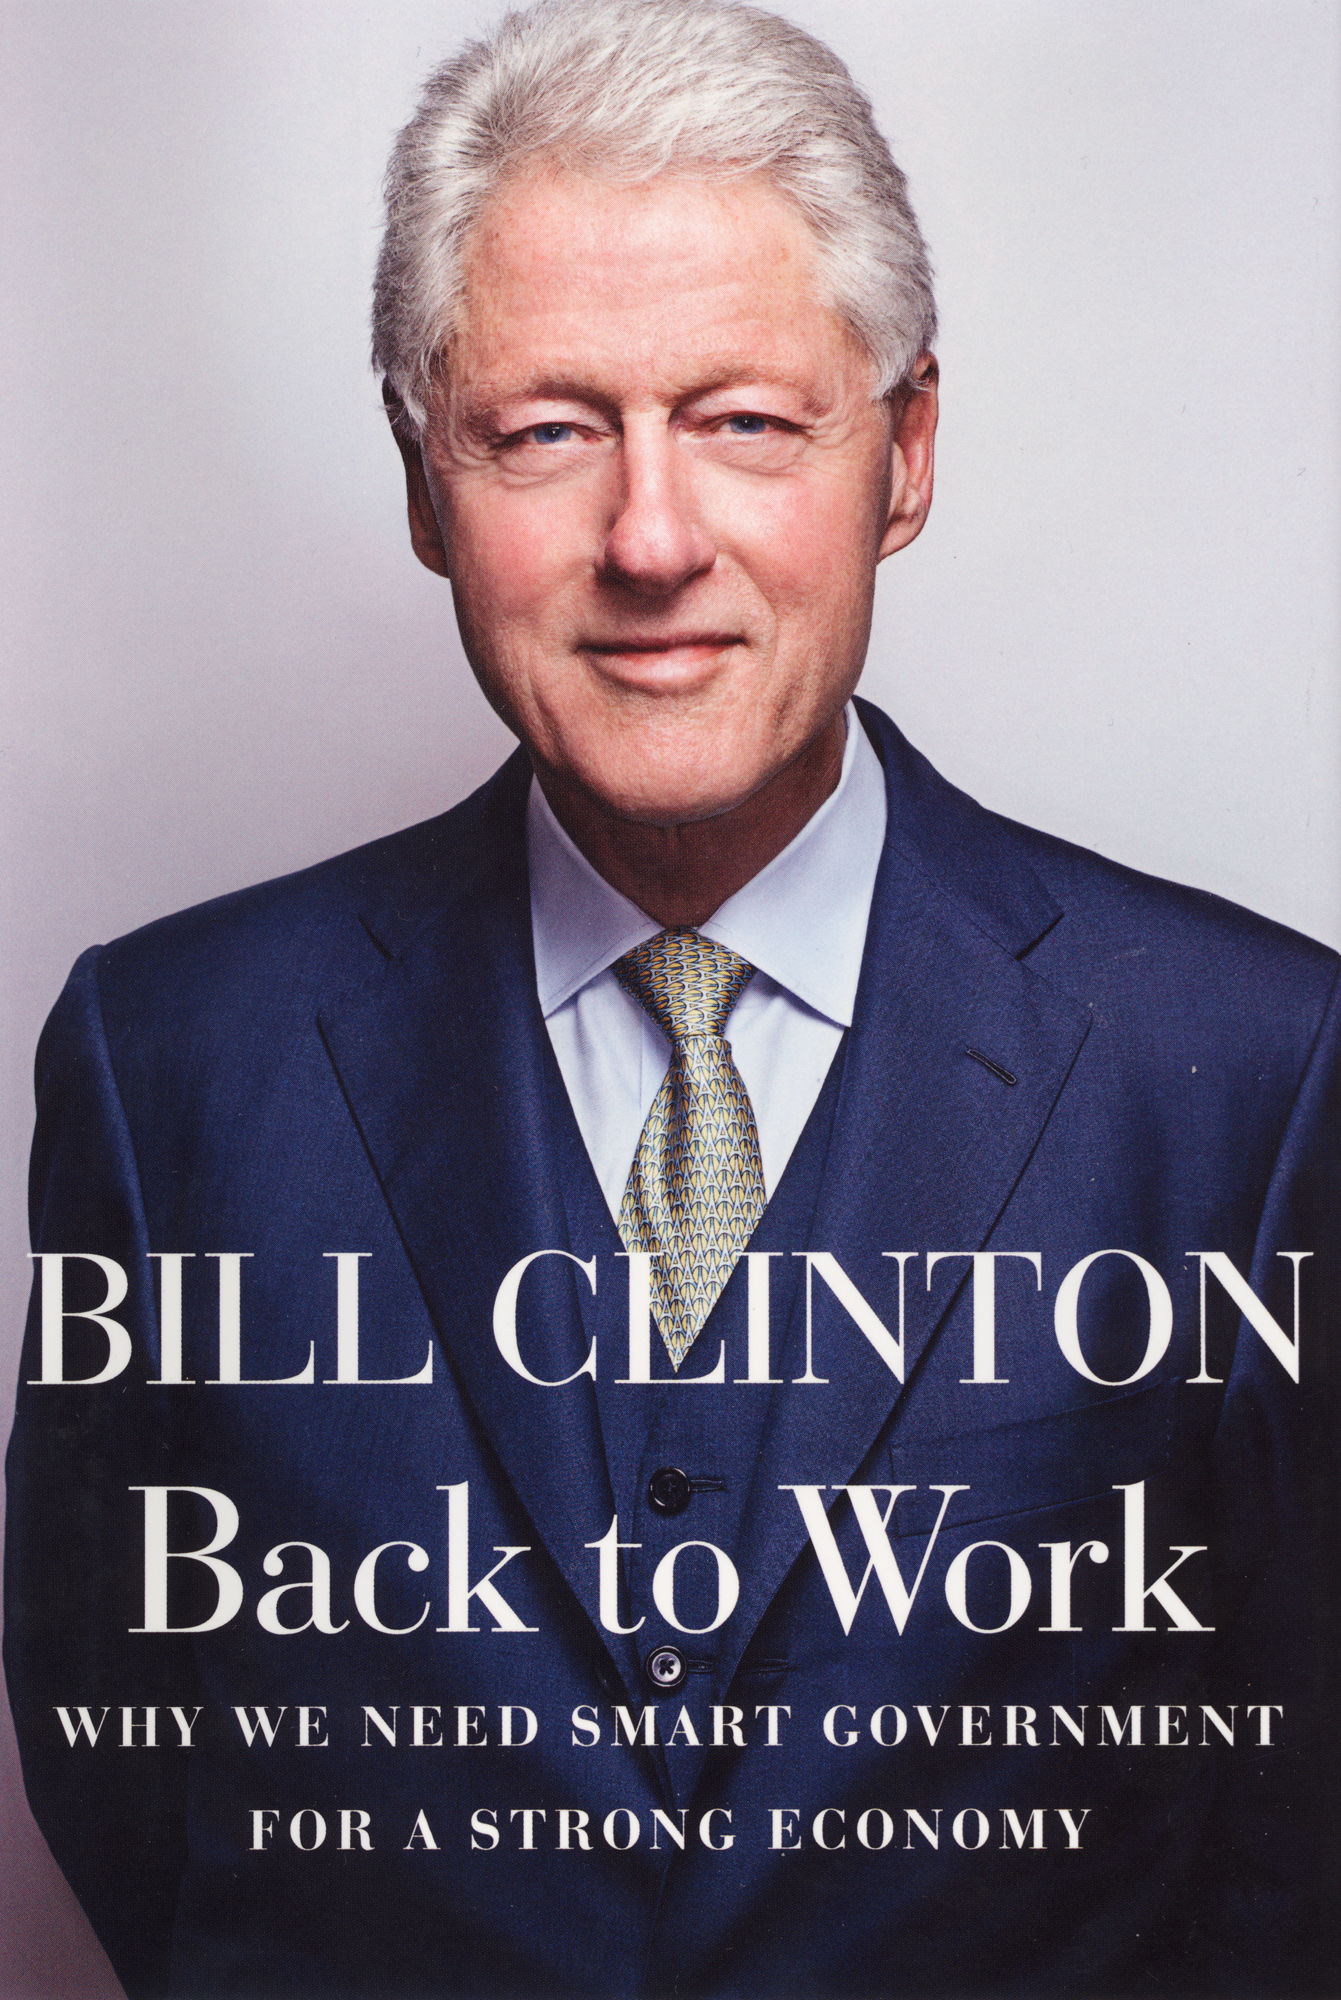 Bill Clinton – Back to work